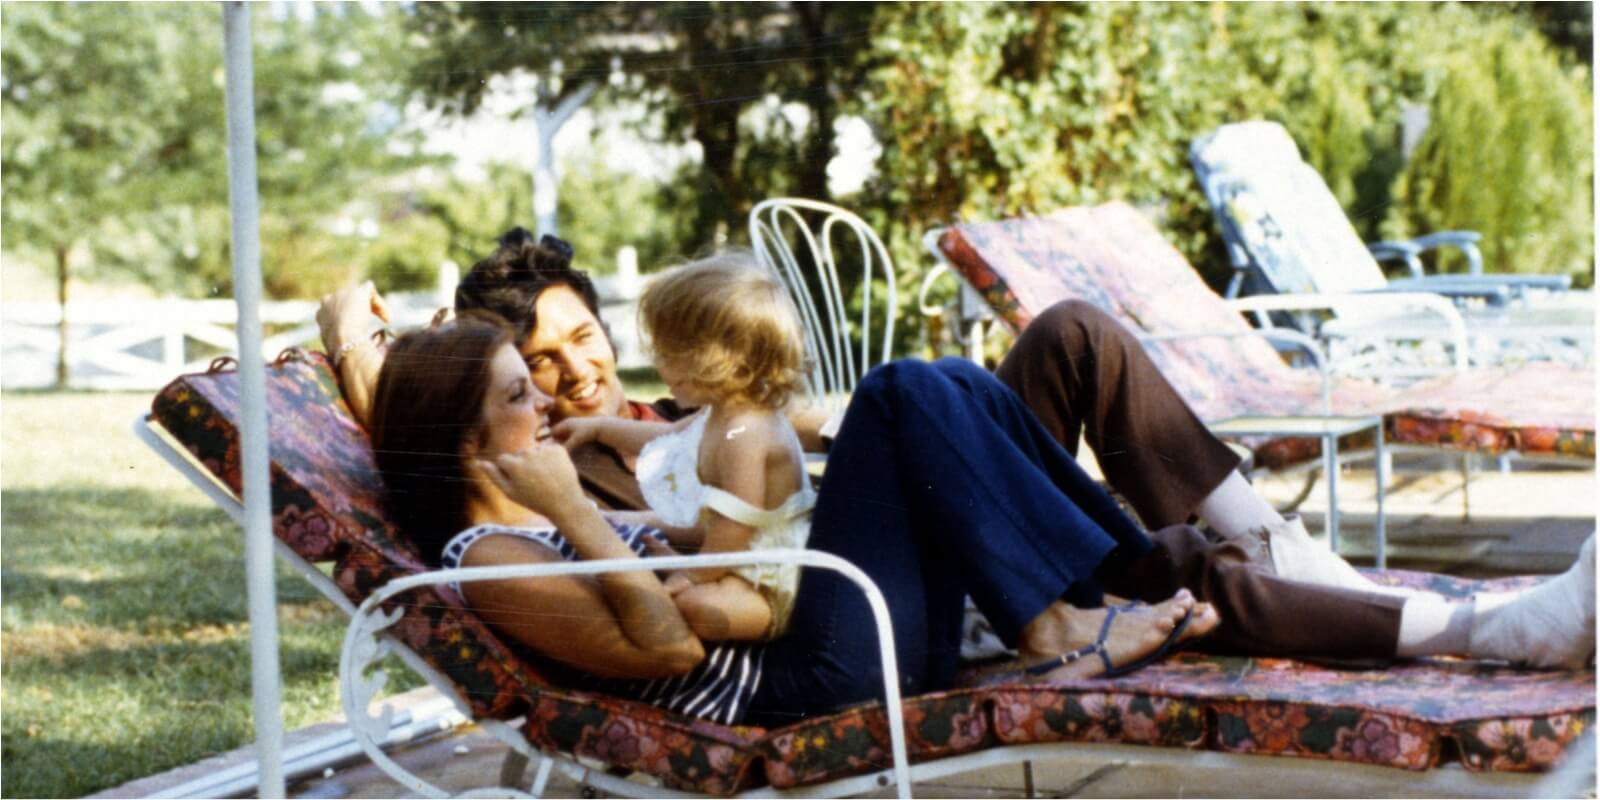 Elvis, Priscilla, and Lisa Marie Presley in Graceland's backyard in the early 1970s.